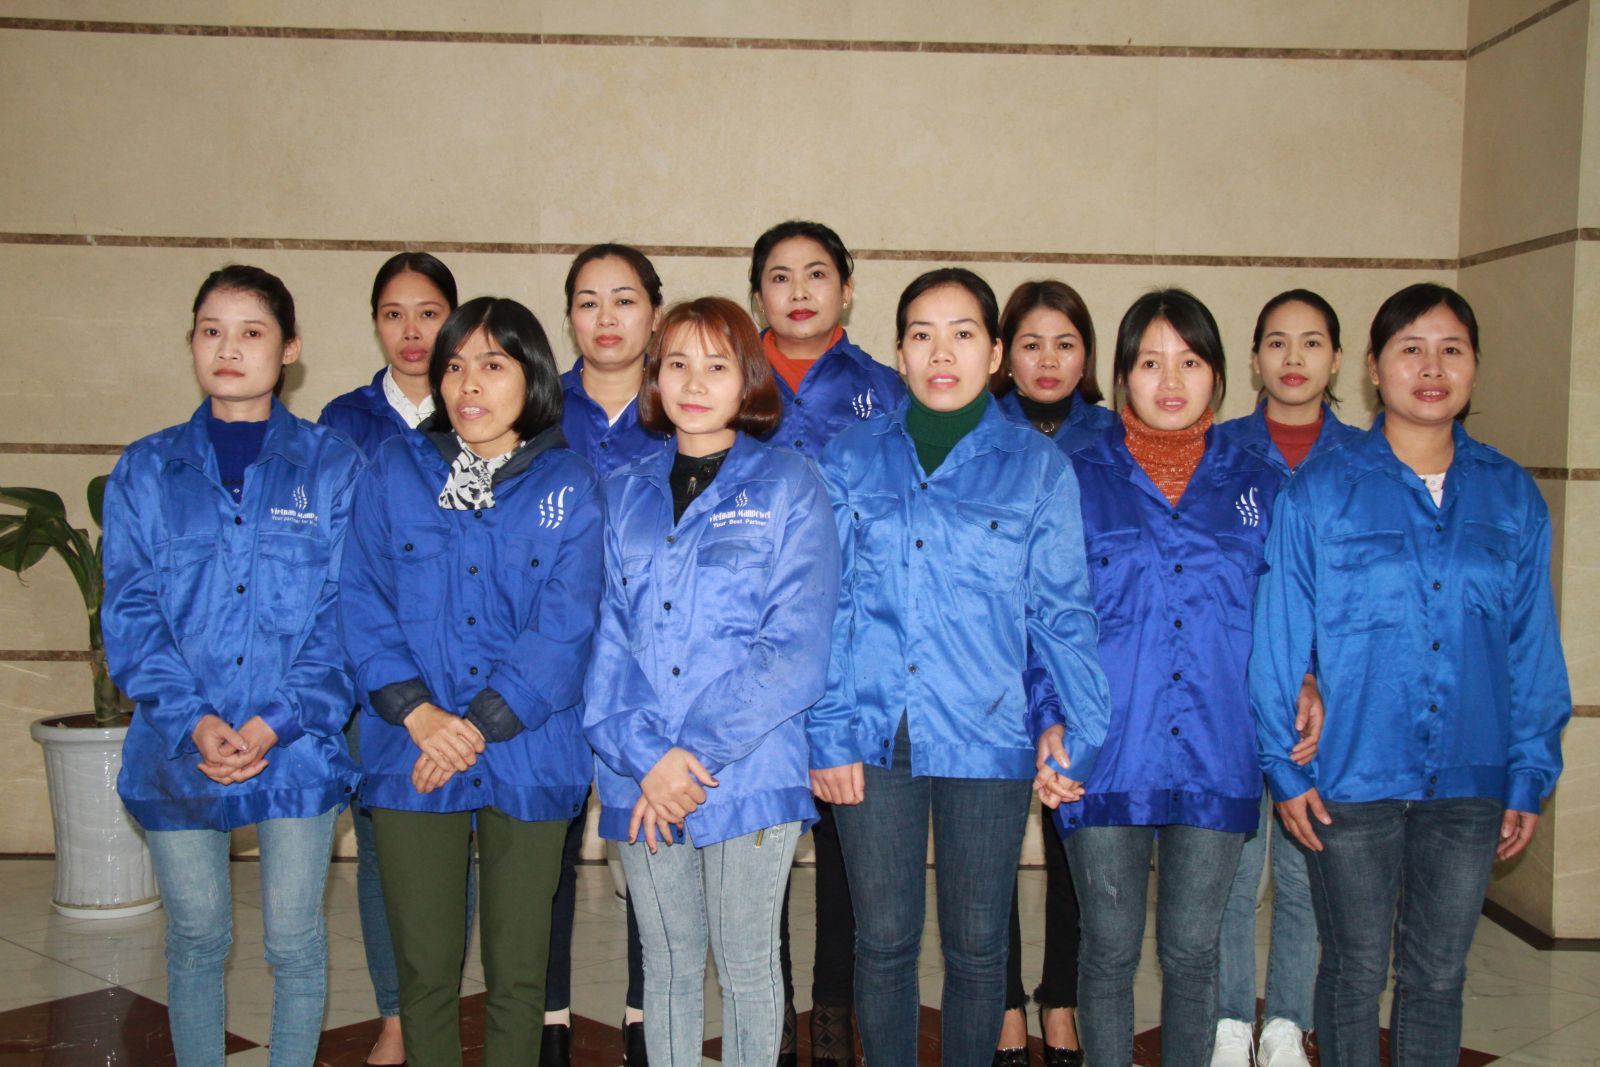 The second cooperation between Vietnam Manpower and Regal S.R.L in Romania has recruited more than 50 slaughter workers organized by Manpower Vietnam.